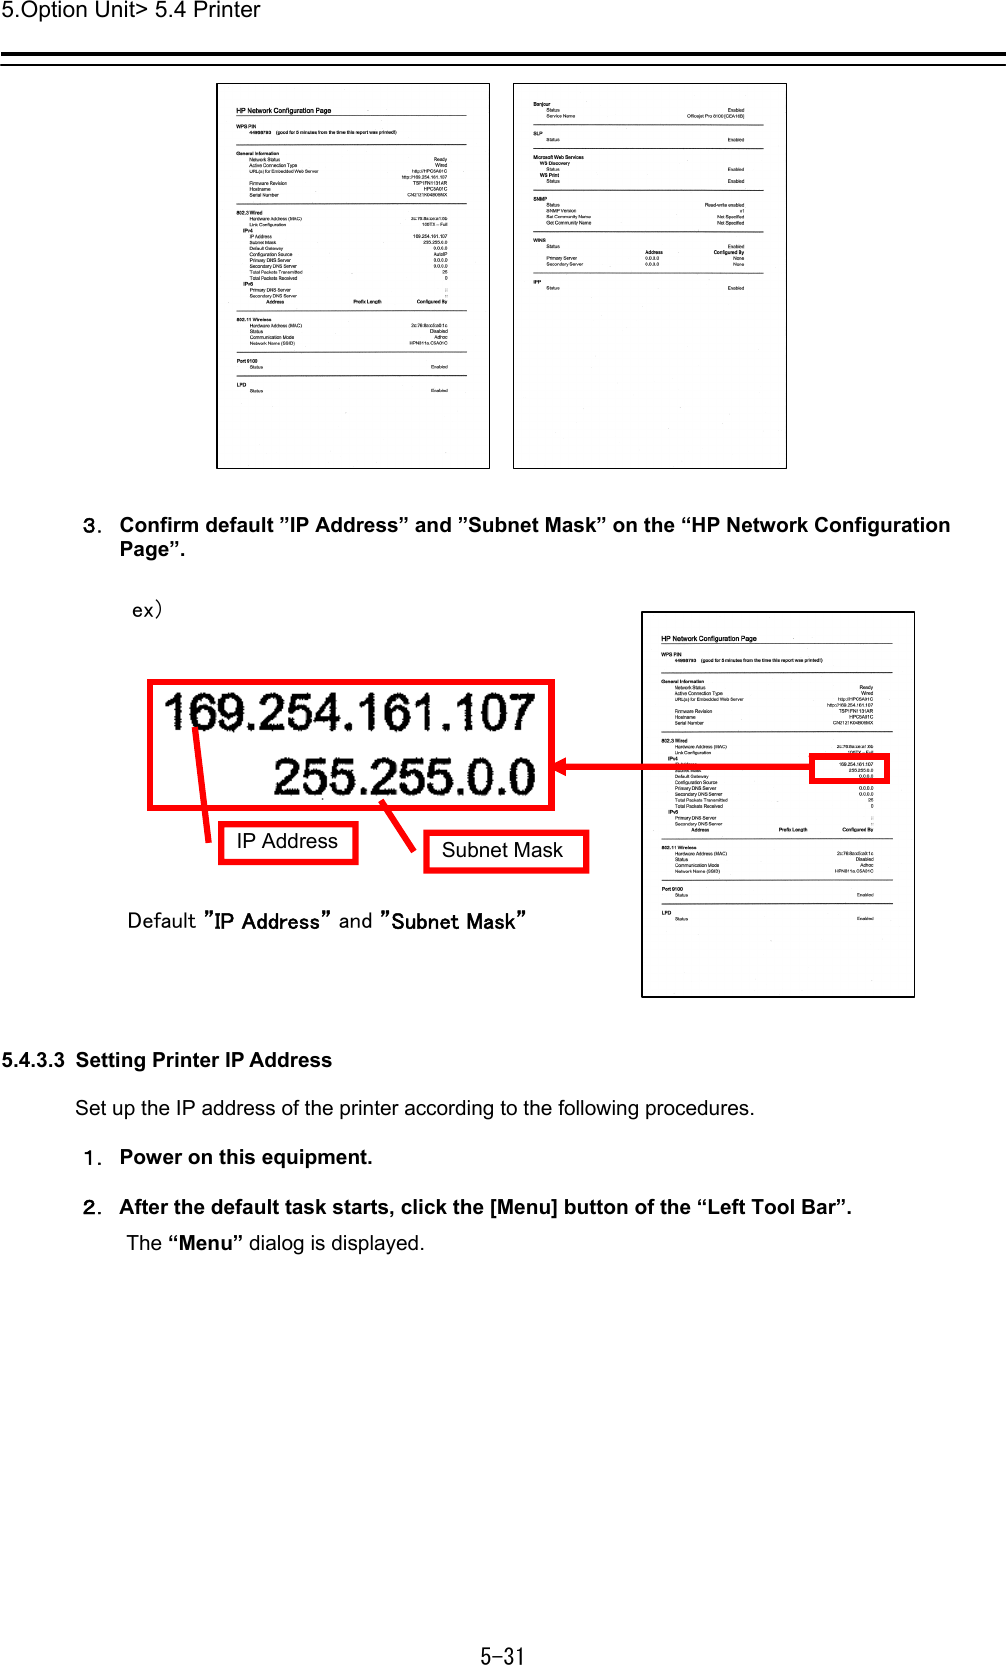 5.Option Unit&gt; 5.4 Printer 5-31   ３． Confirm default ”IP Address” and ”Subnet Mask” on the “HP Network Configuration Page”.    5.4.3.3  Setting Printer IP Address  Set up the IP address of the printer according to the following procedures.  １． Power on this equipment.  ２． After the default task starts, click the [Menu] button of the “Left Tool Bar”. The “Menu” dialog is displayed. Default ”IP Address” and ”Subnet Mask” IP Address  Subnet Mask ex） 